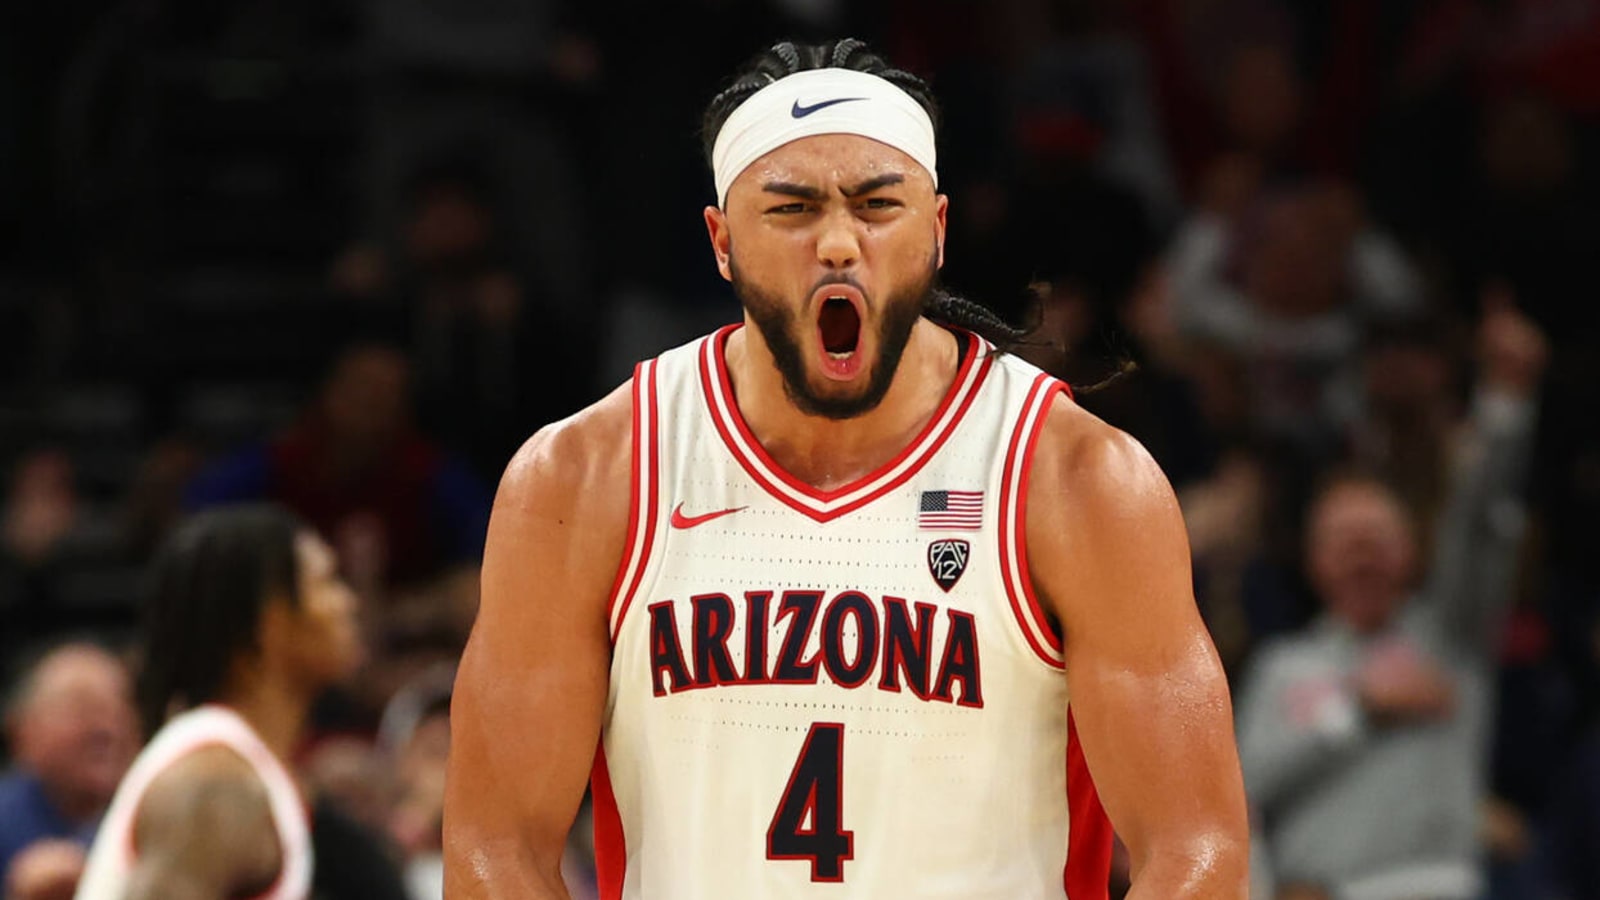 Watch: Arizona guard leaves fans stunned with pass